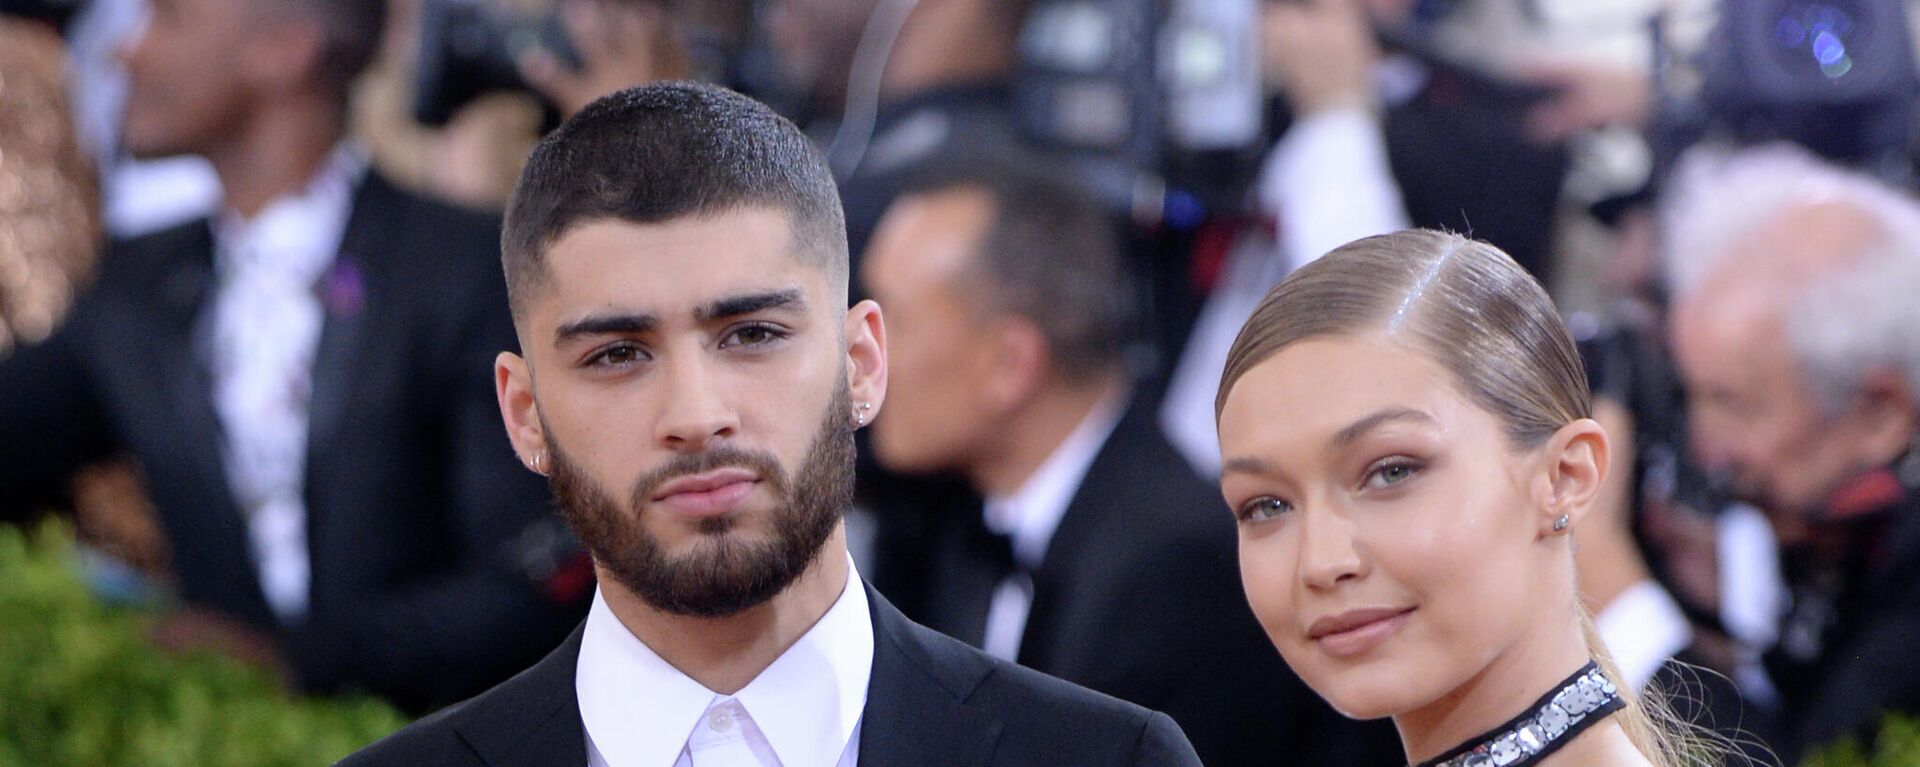 Zayn Malik, left, and Gigi Hadid arrive at The Metropolitan Museum of Art Costume Institute Benefit Gala, celebrating the opening of Manus x Machina: Fashion in an Age of Technology on Monday, May 2, 2016, in New York. - Sputnik International, 1920, 30.10.2021